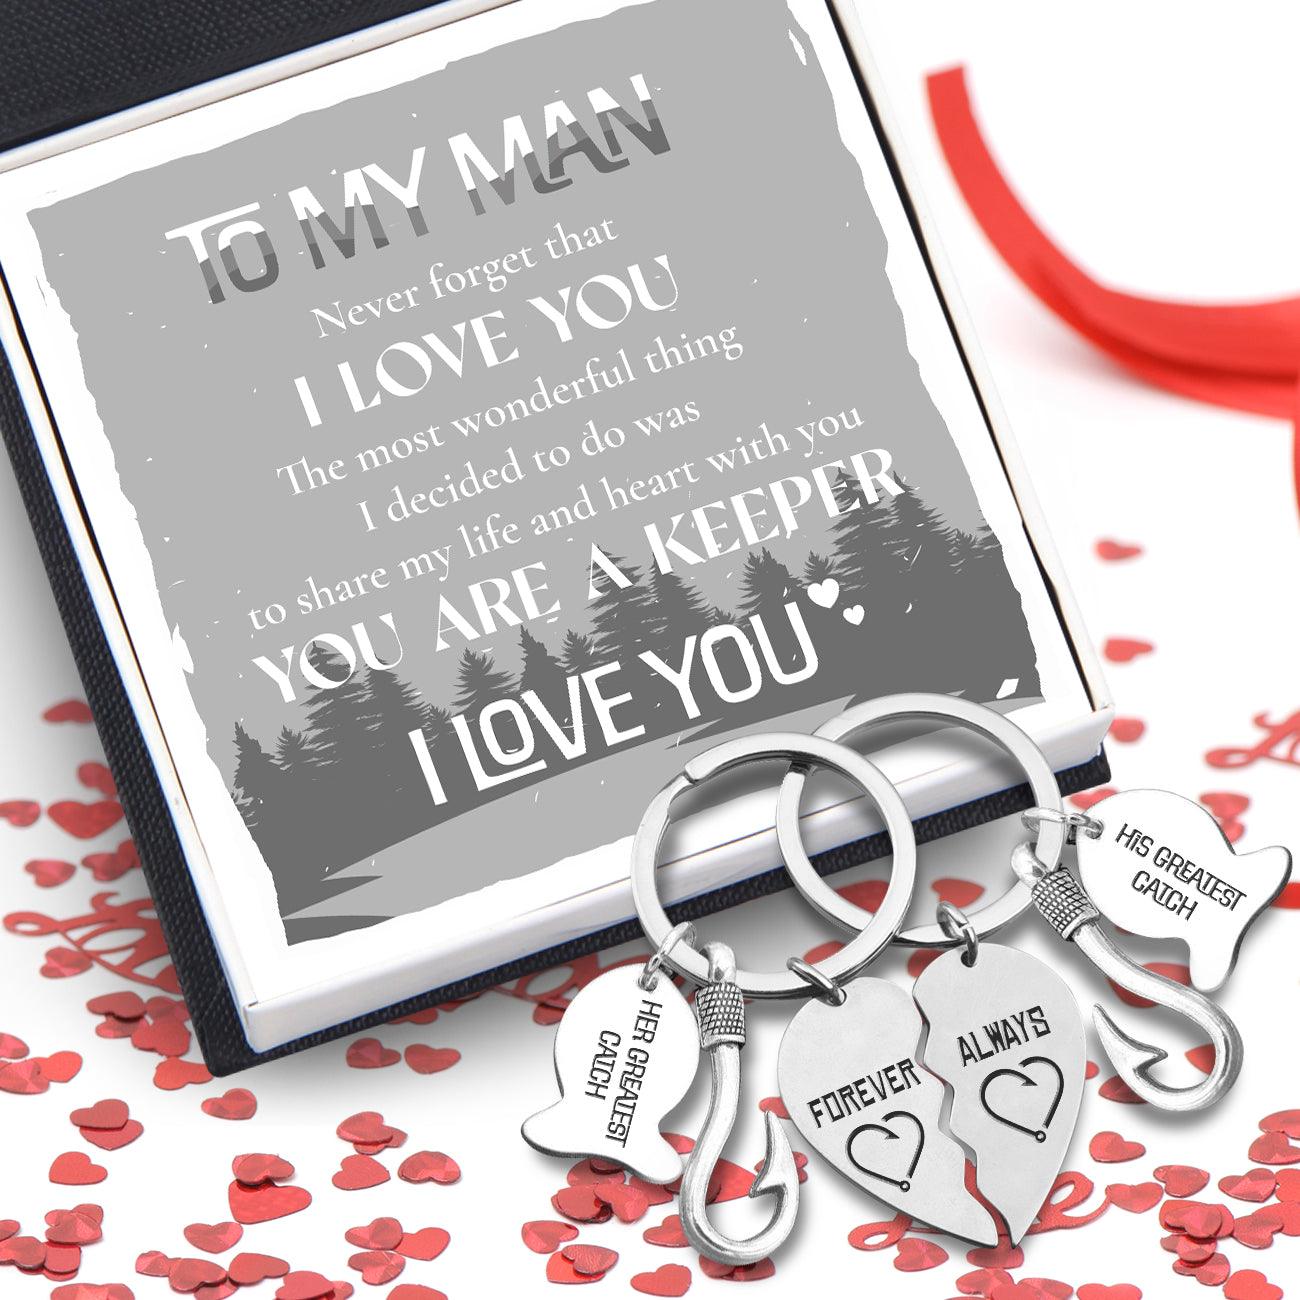 Fishing Heart Puzzle Keychains - To My Man - Never Forget That I Love You - Augkbn26003 - Gifts Holder